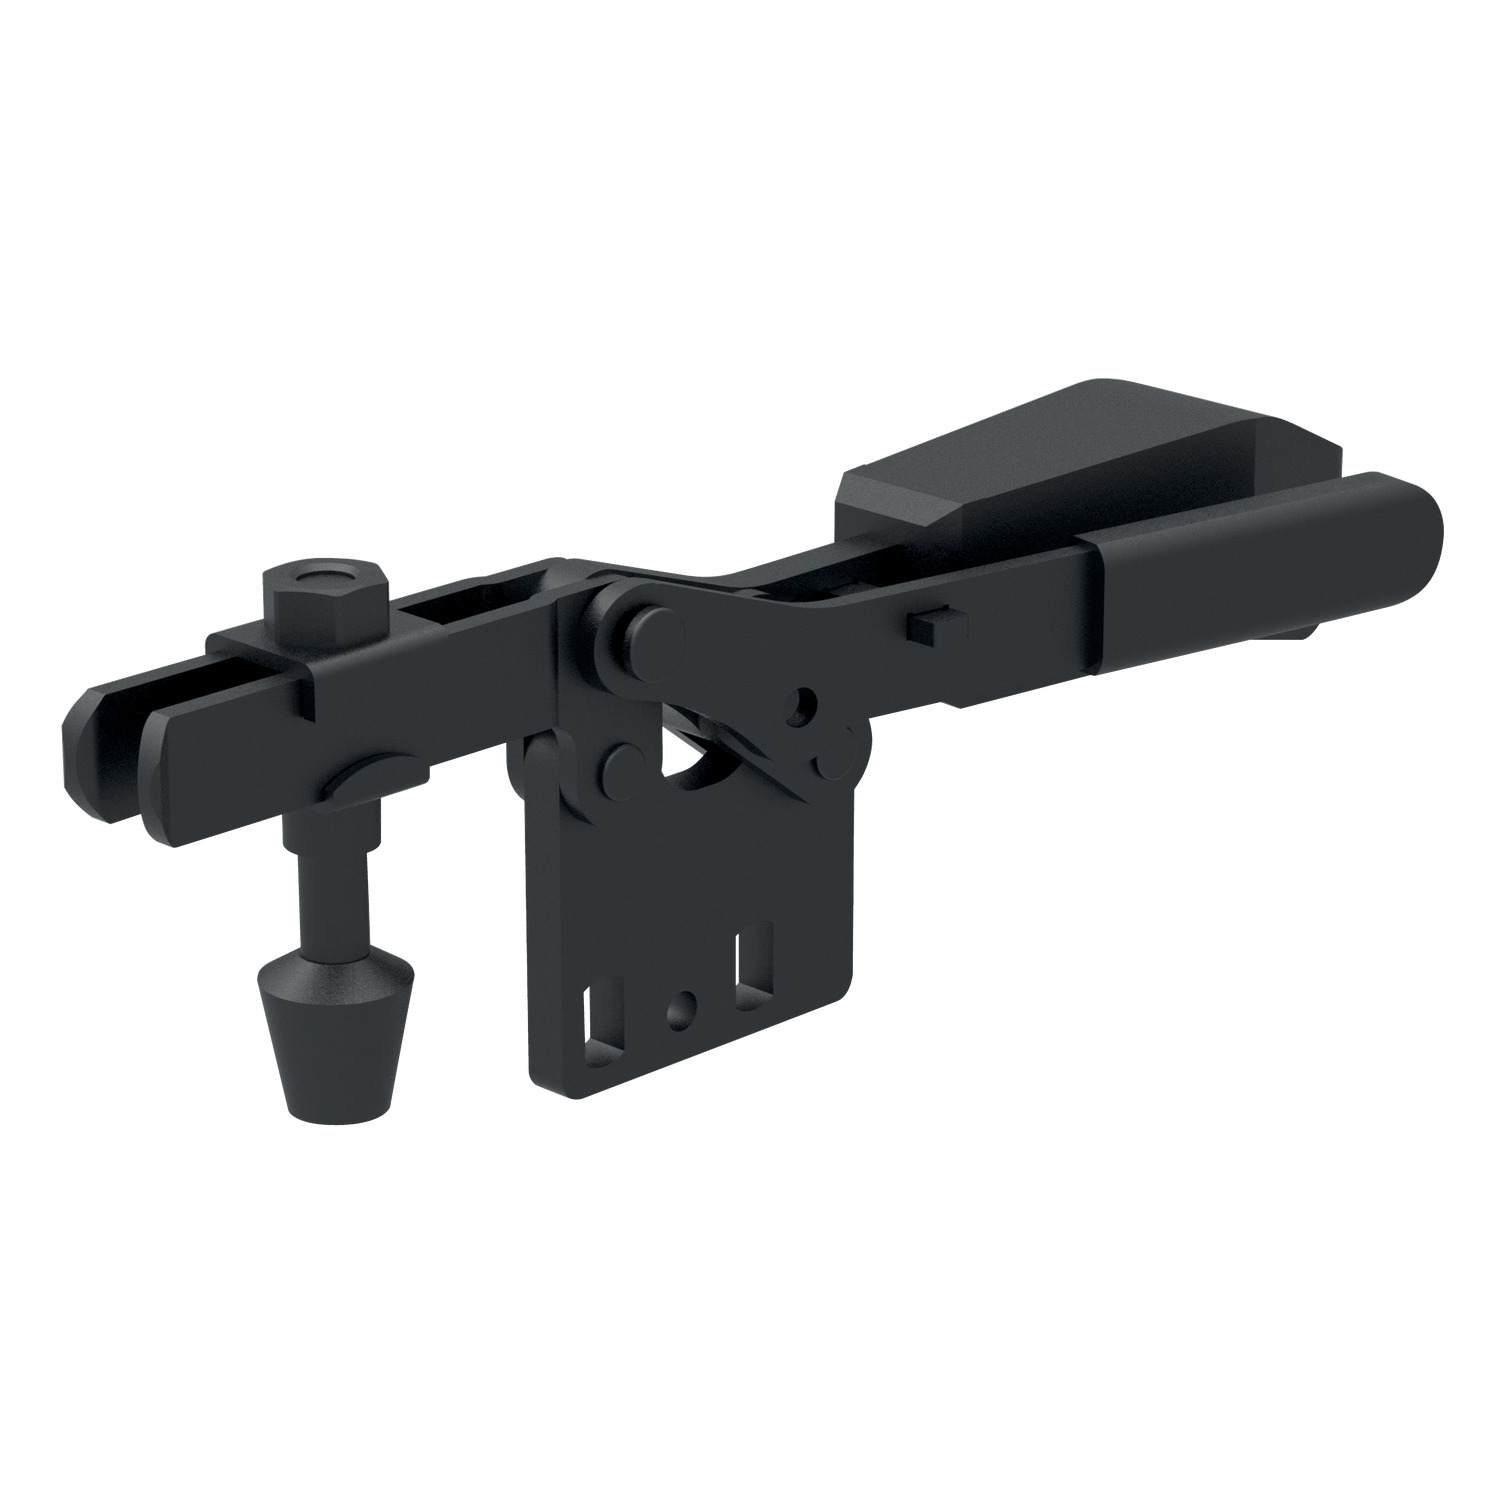 41060.2 - Horizontal Acting Toggle Clamps